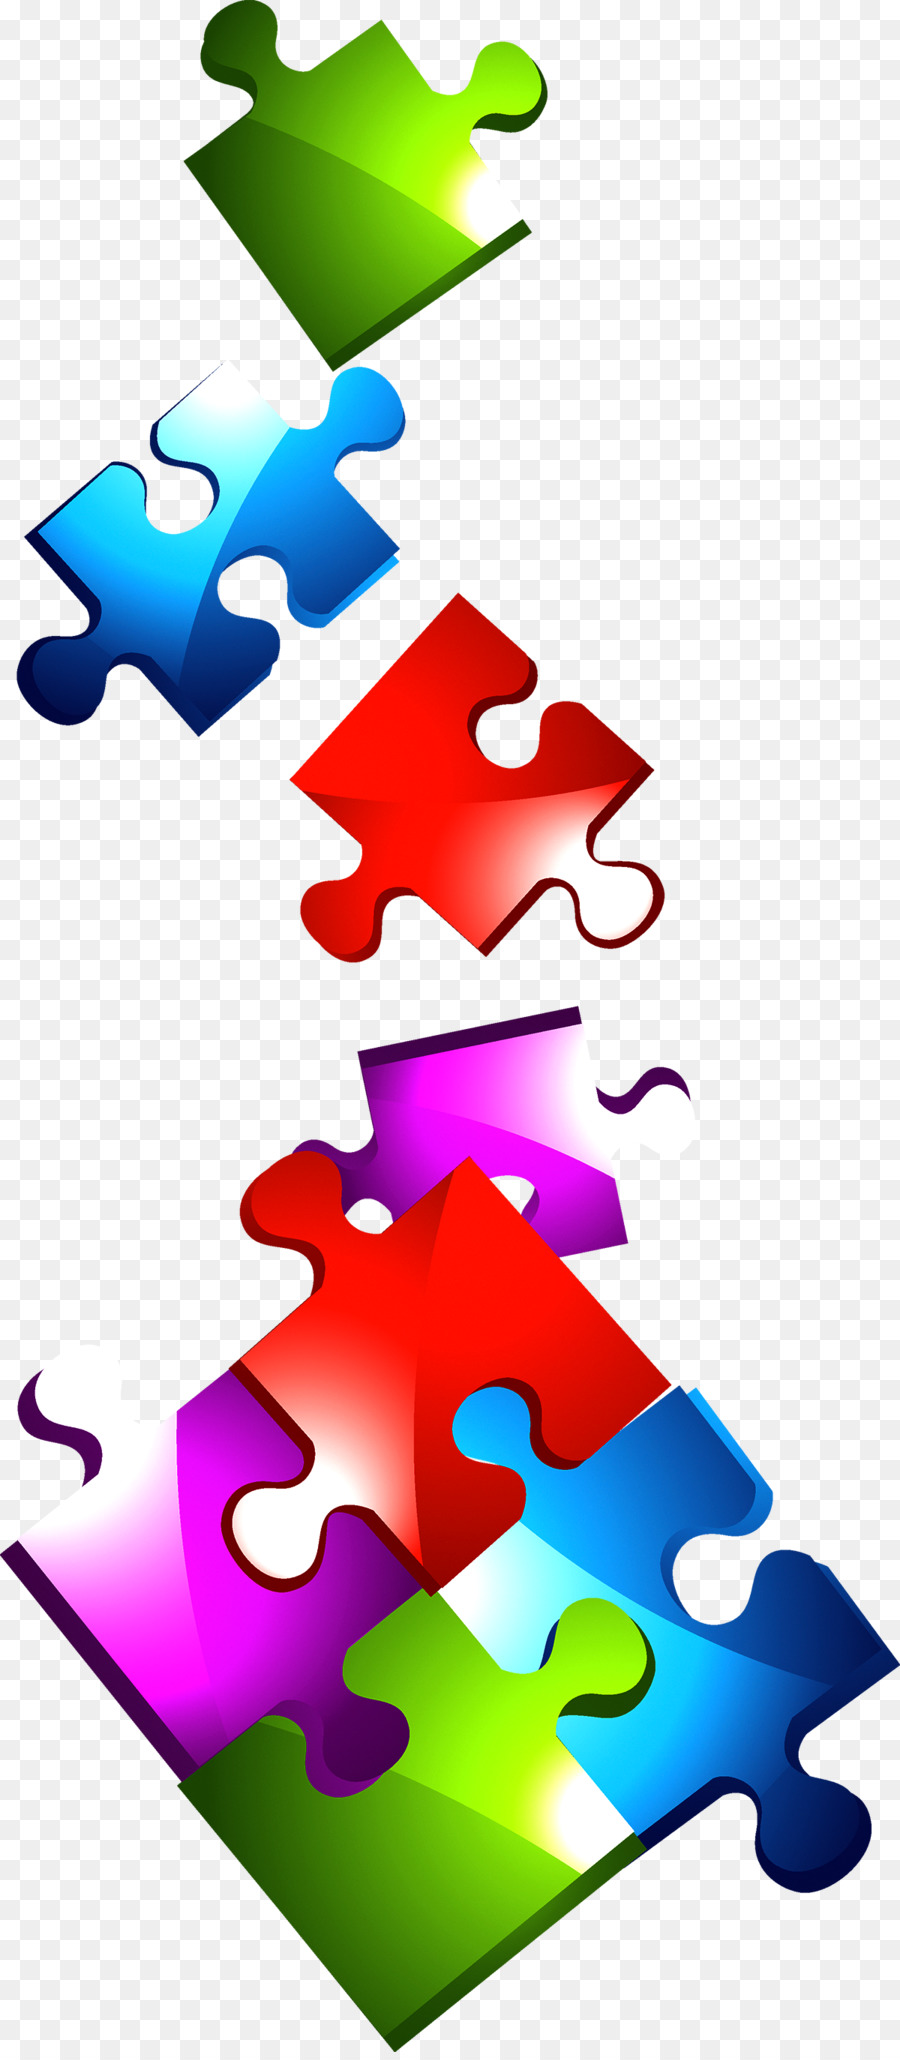 Jigsaw puzzle Puzz 3D - Colorful puzzle png download - 1200*2736 - Free Transparent Jigsaw Puzzle png Download.